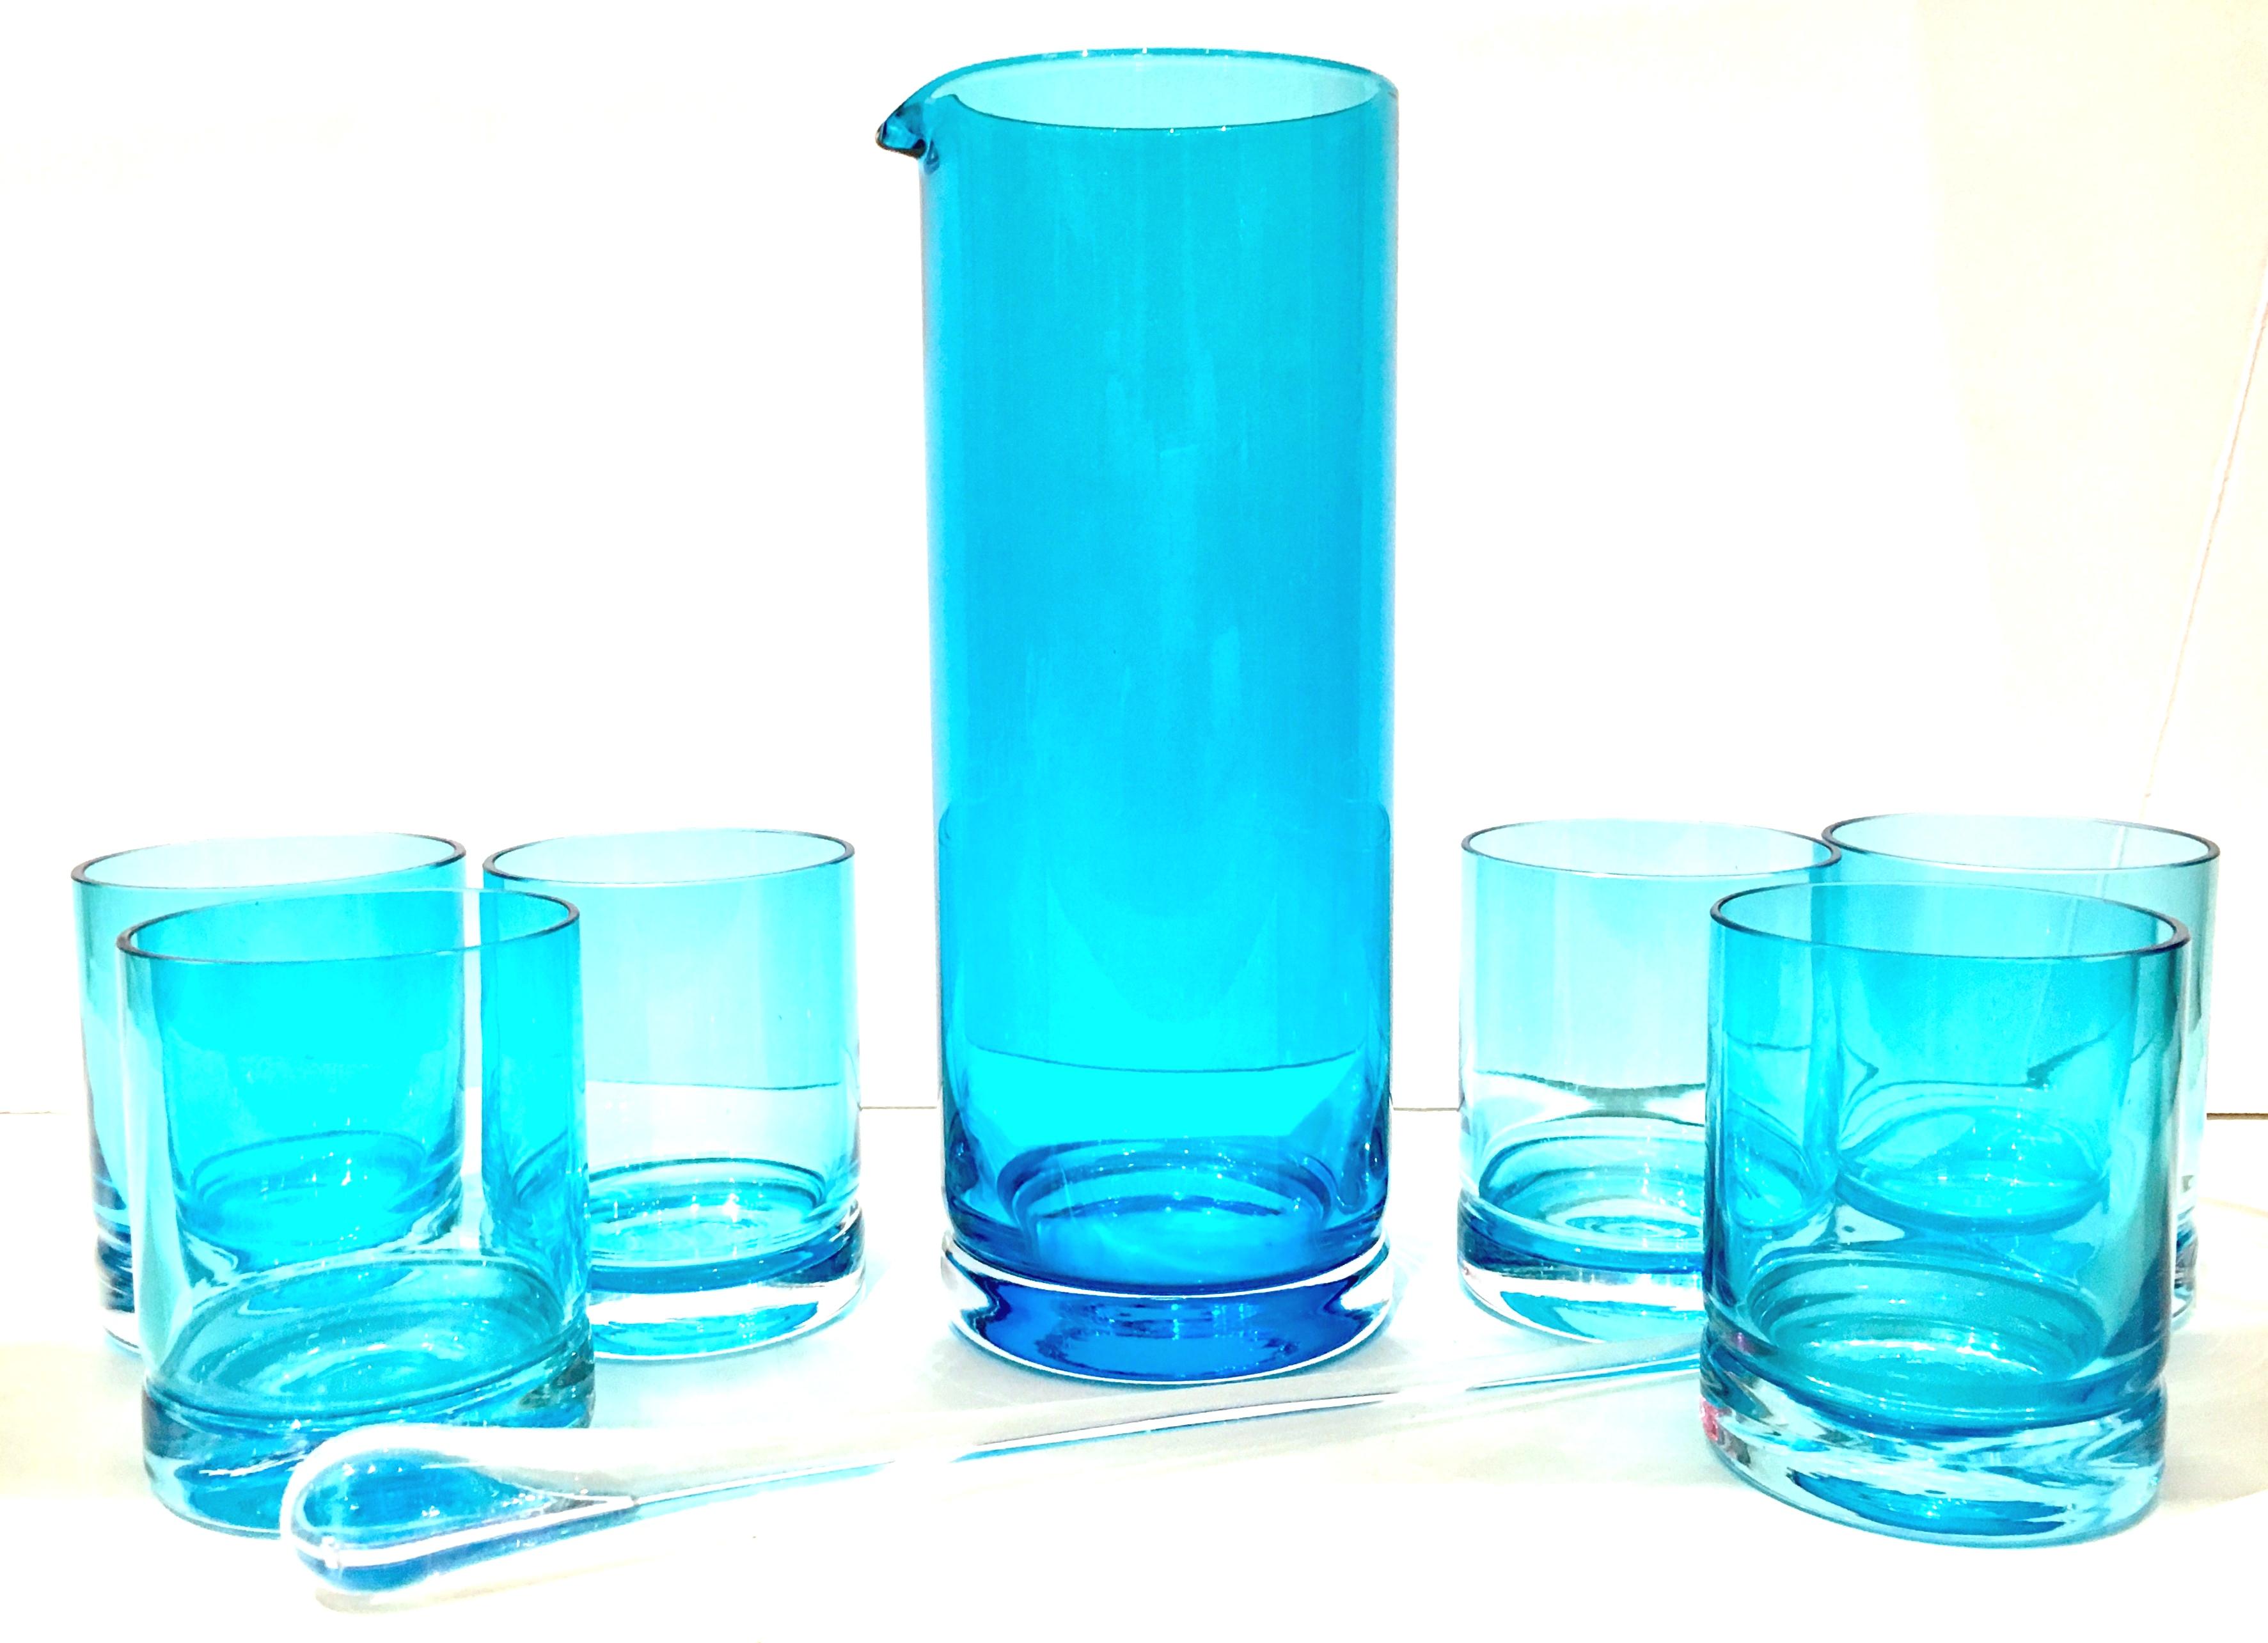 21st century and new blown glass blue drinks set of eight pieces.
Set includes, on spouted drinks pitcher, one clear cocktail stirrer and six double old fashion glasses.
Double old fashion glass: 4